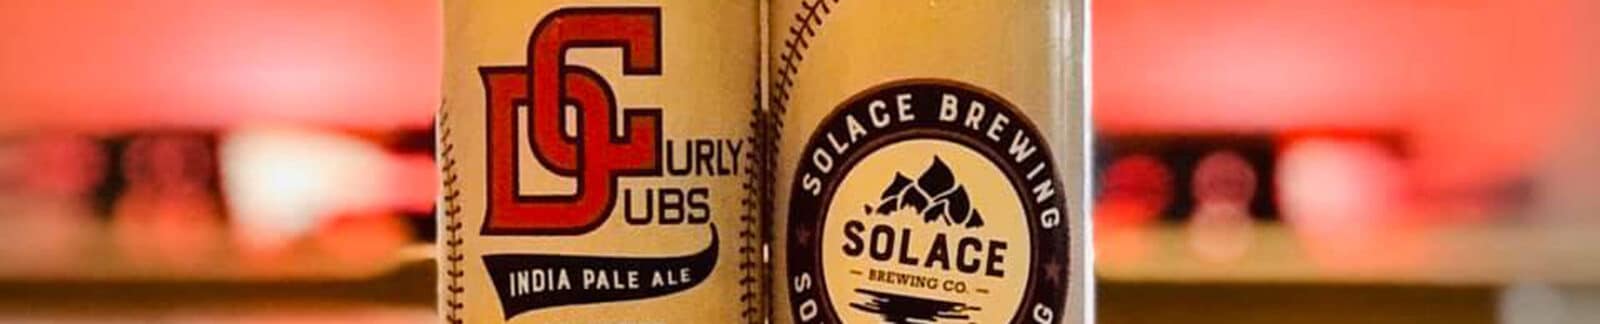 Curly Dubs IPA from Solace Brewing header